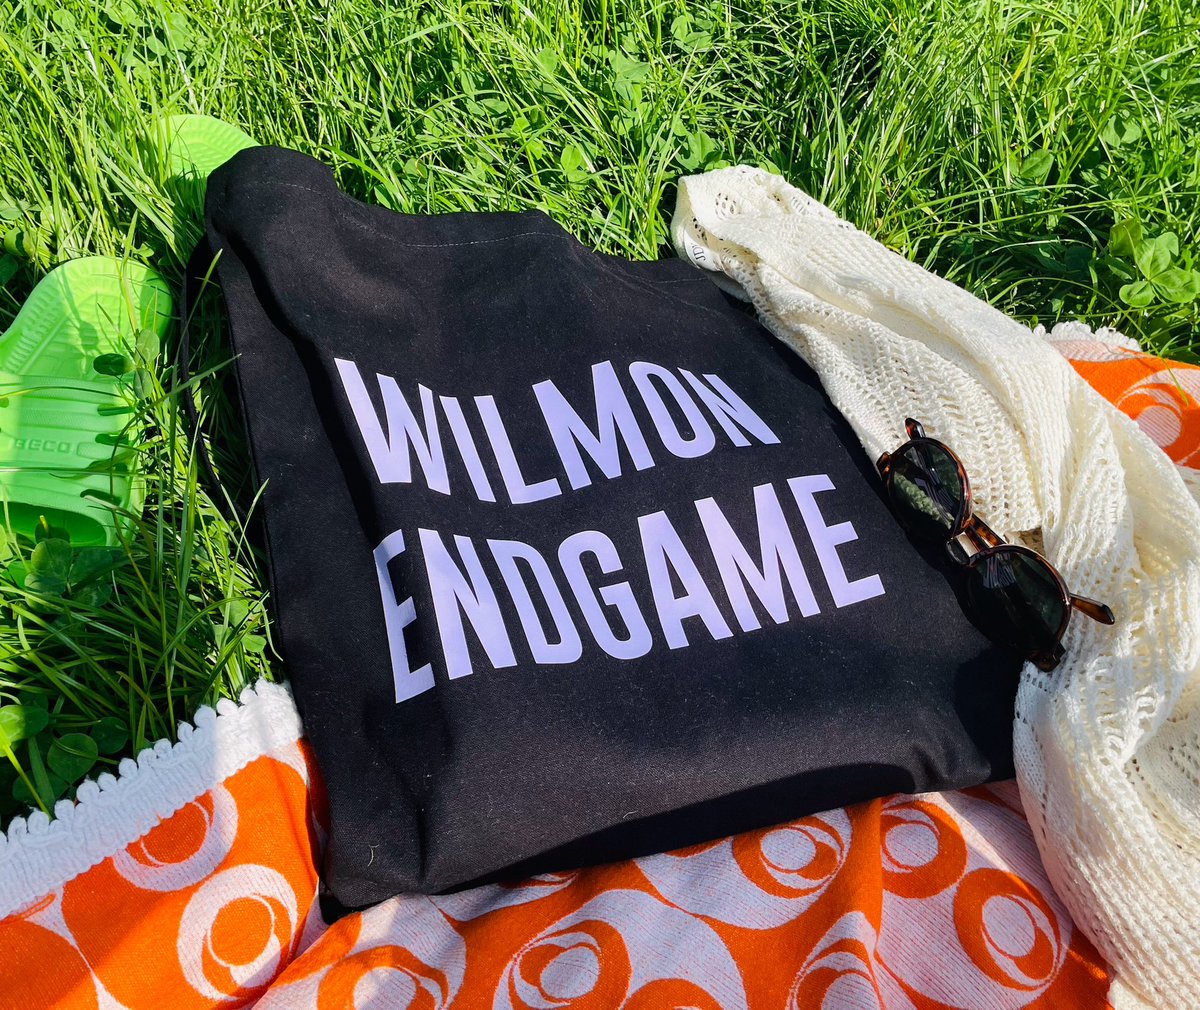 Still fancy my #wilmonendgame bag 💜 #summeressentials 🌸
So, next bag could be an #edmarforever one 🧡 - according to Intro & Duo? 💜🧡
Opinions, suggestions? Tysm! Hope you have a nice summer! ☺️☀️😘